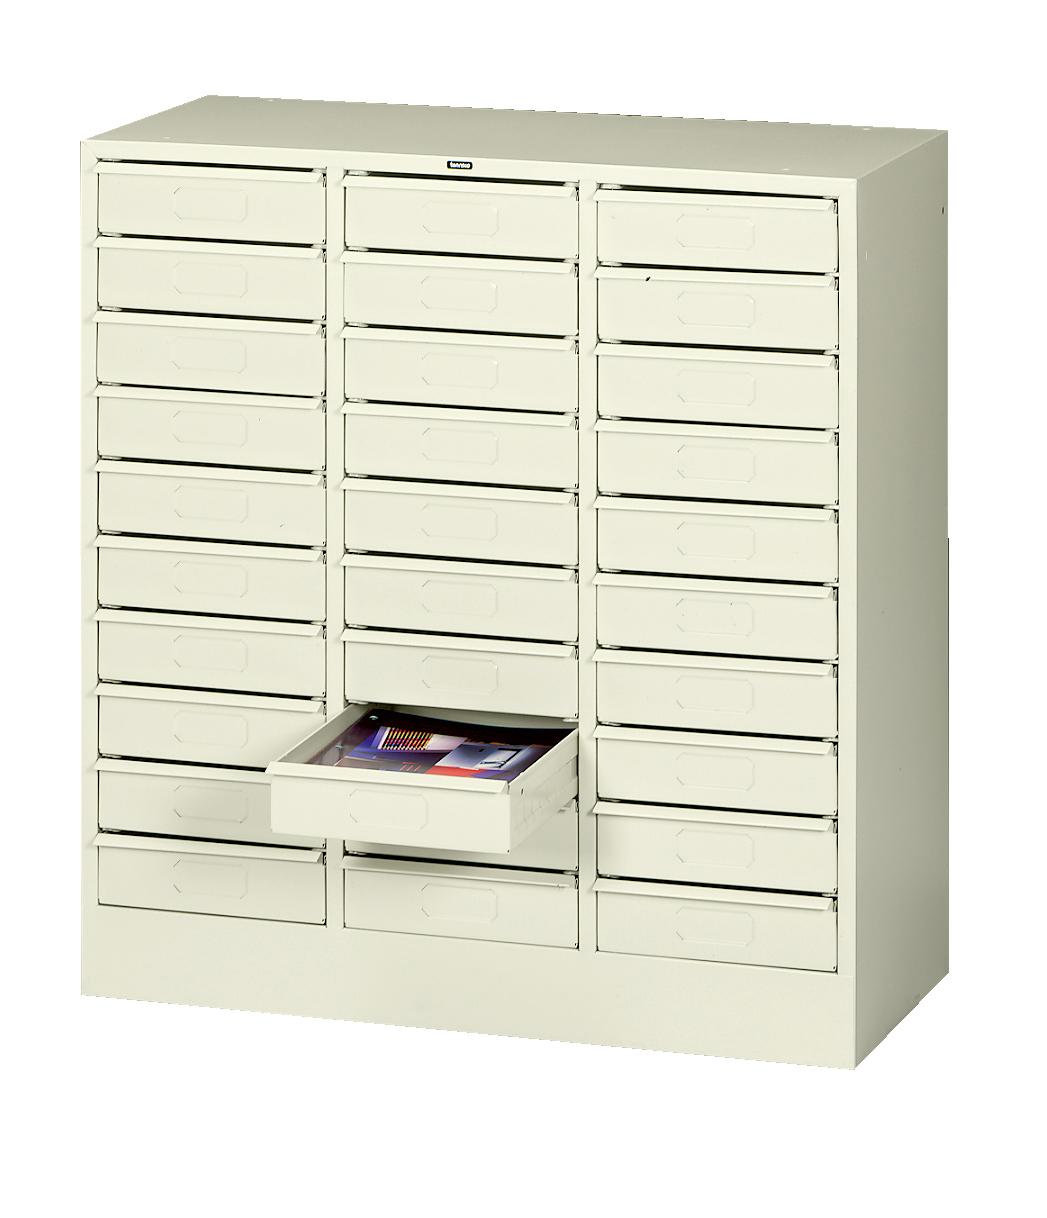 30-Drawer Organizers - Legal Size Openings  document drawers